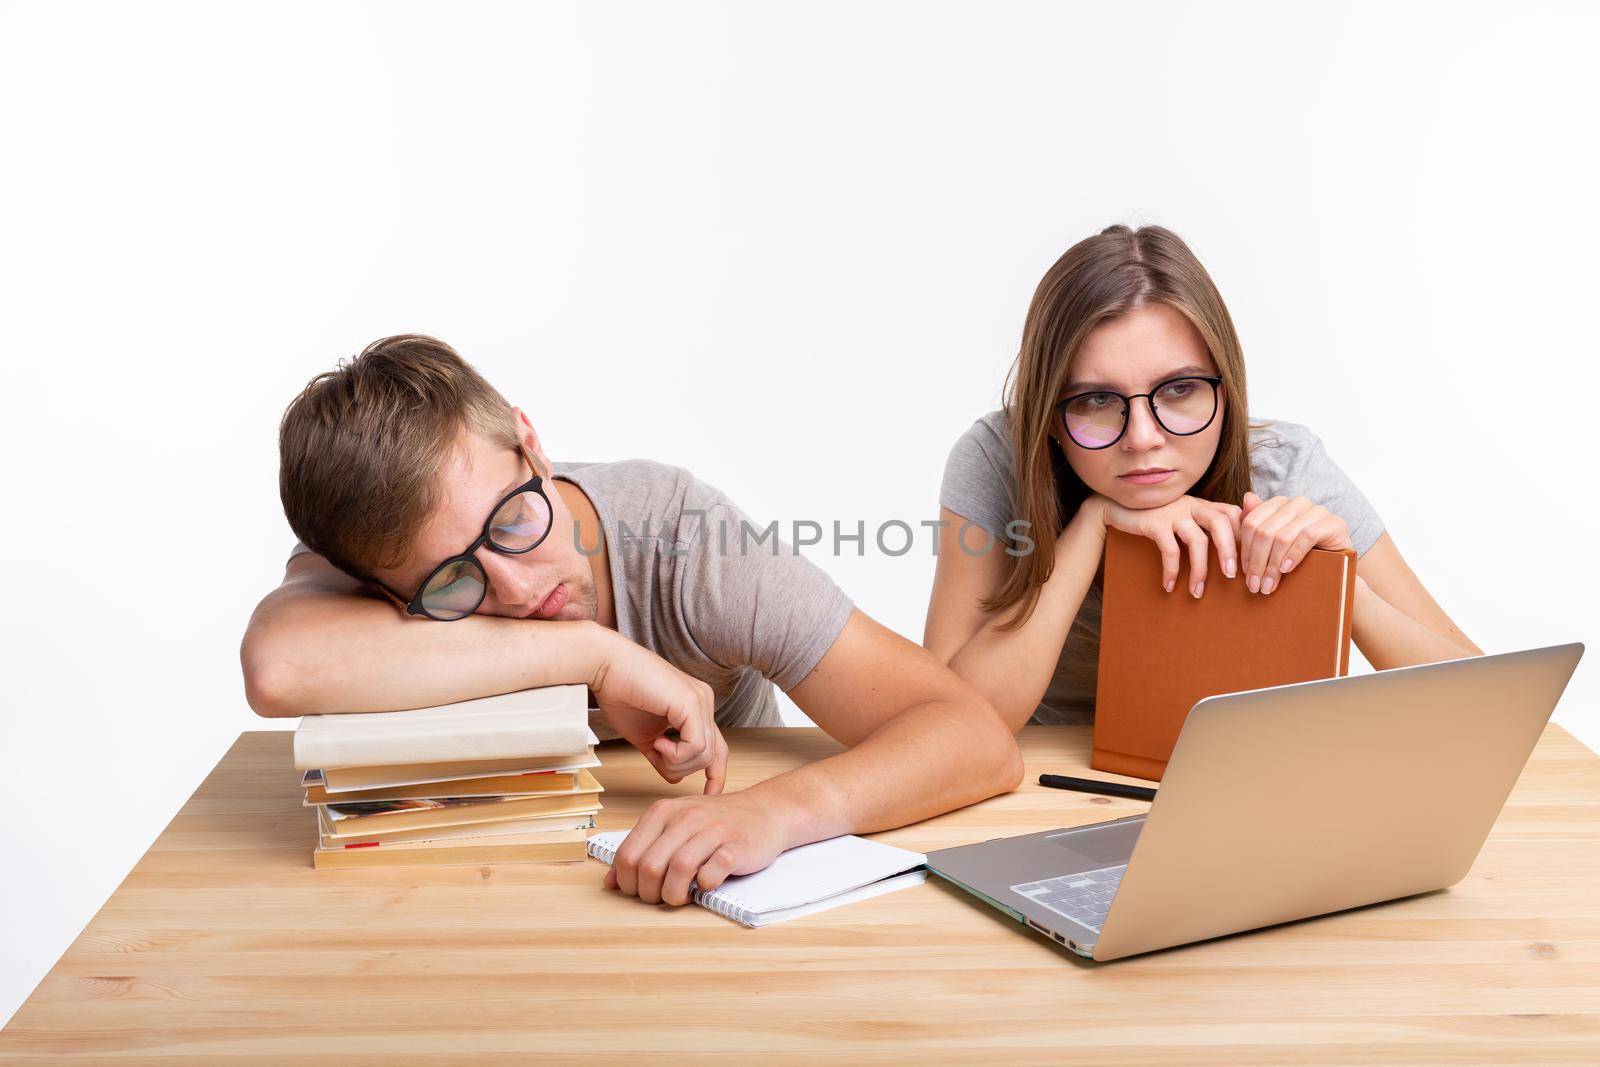 Education, people concept- a couple of young people in glasses look like they are bored of learning homework.